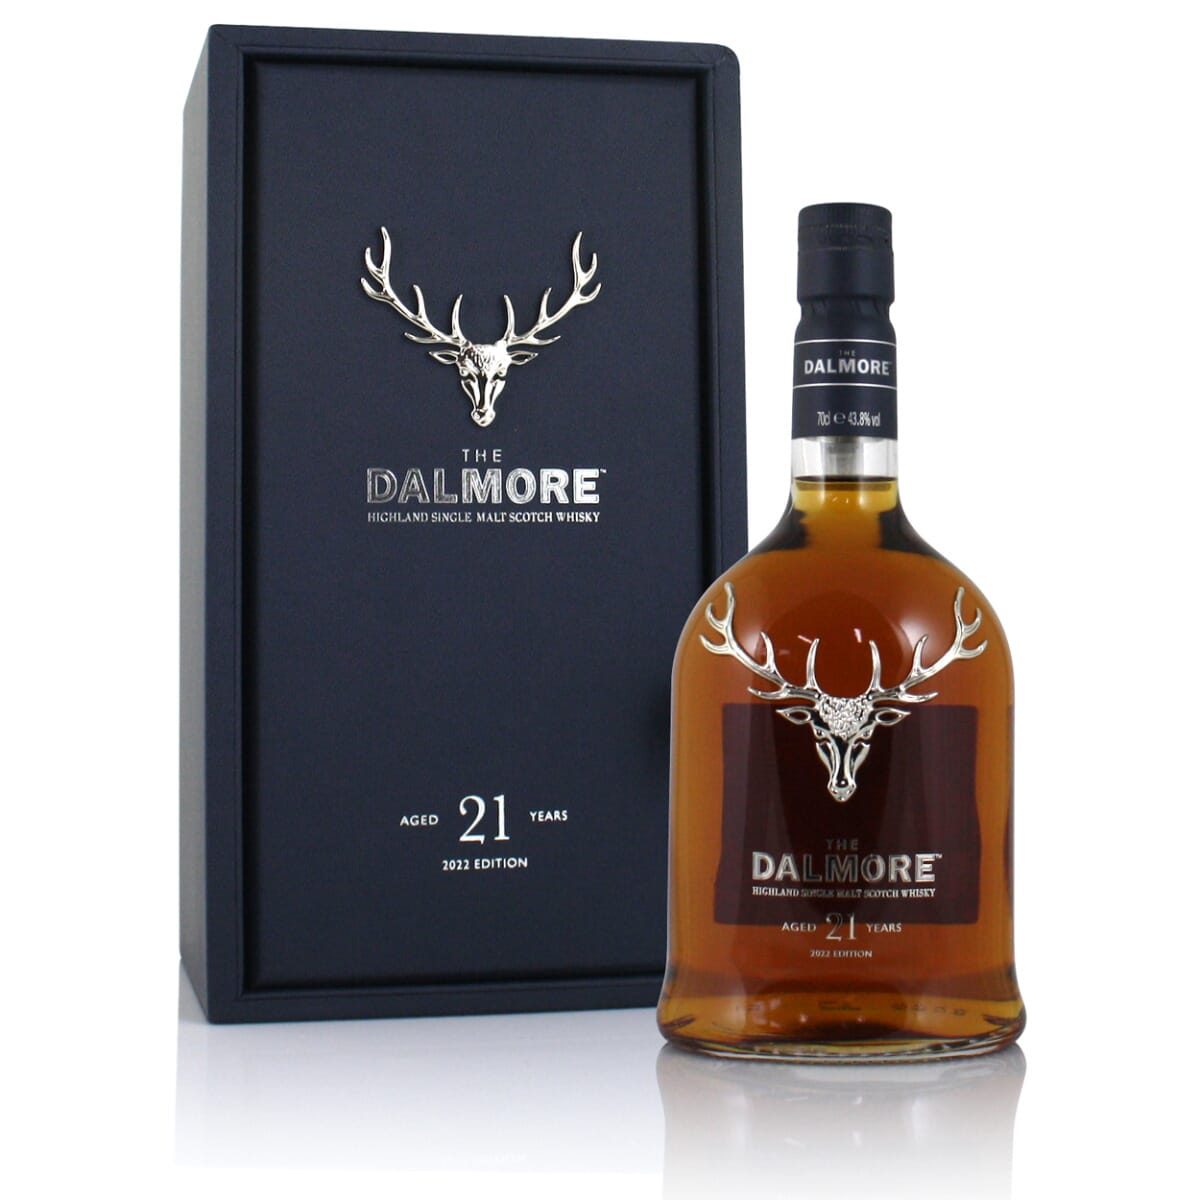 Dalmore 2008 Vintage Collection 2023